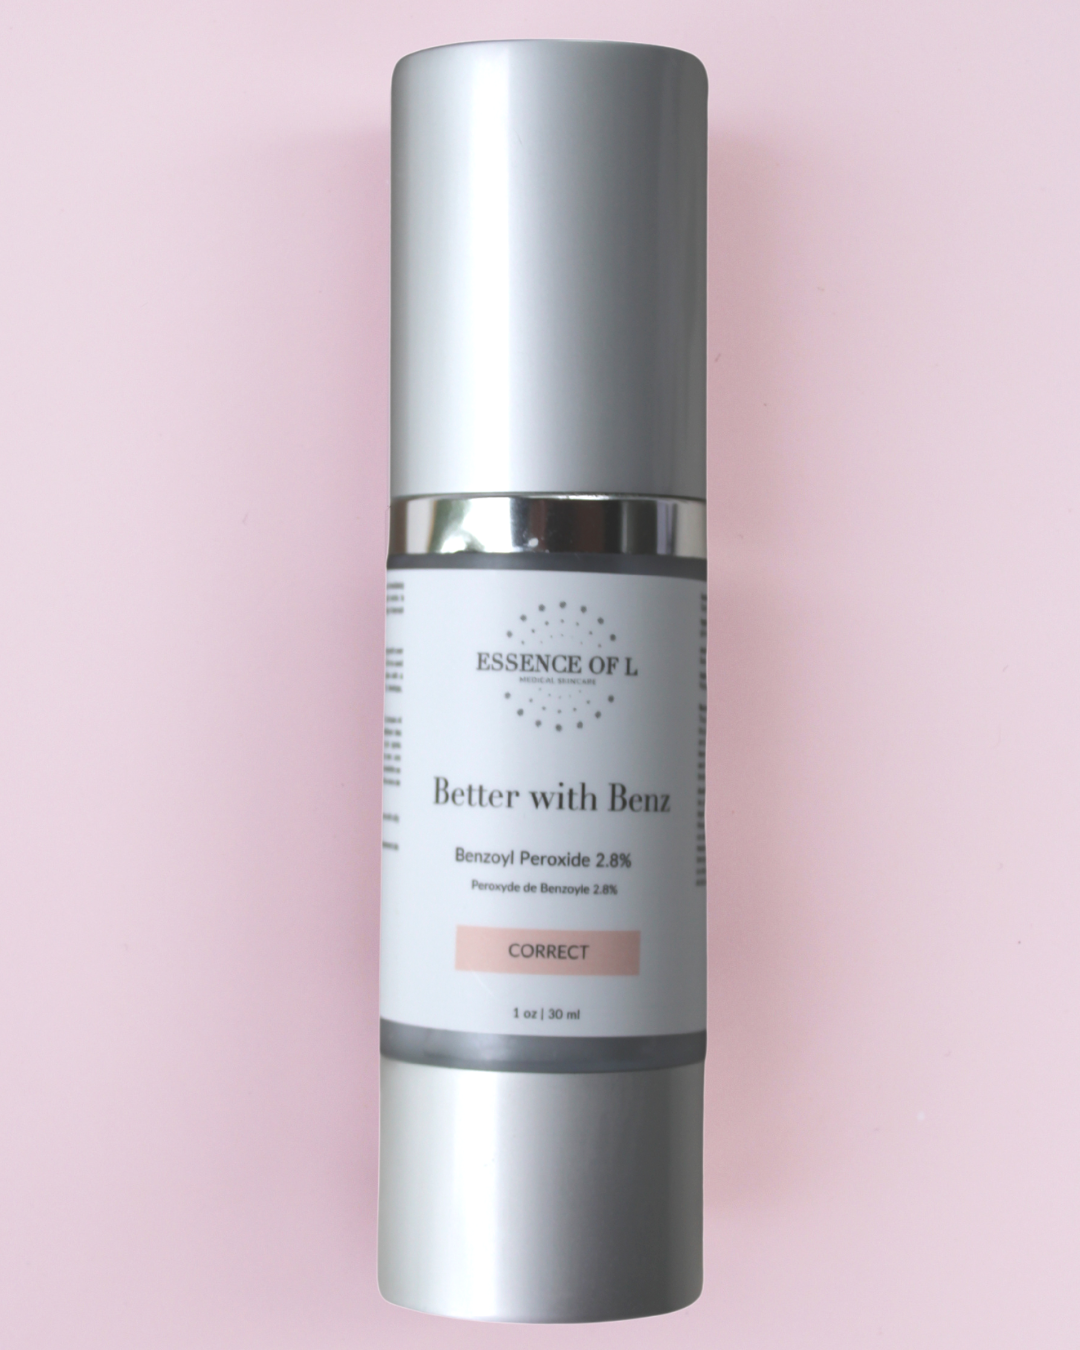 Better with Benz (2.8%) Benzoyl Peroxide Serum